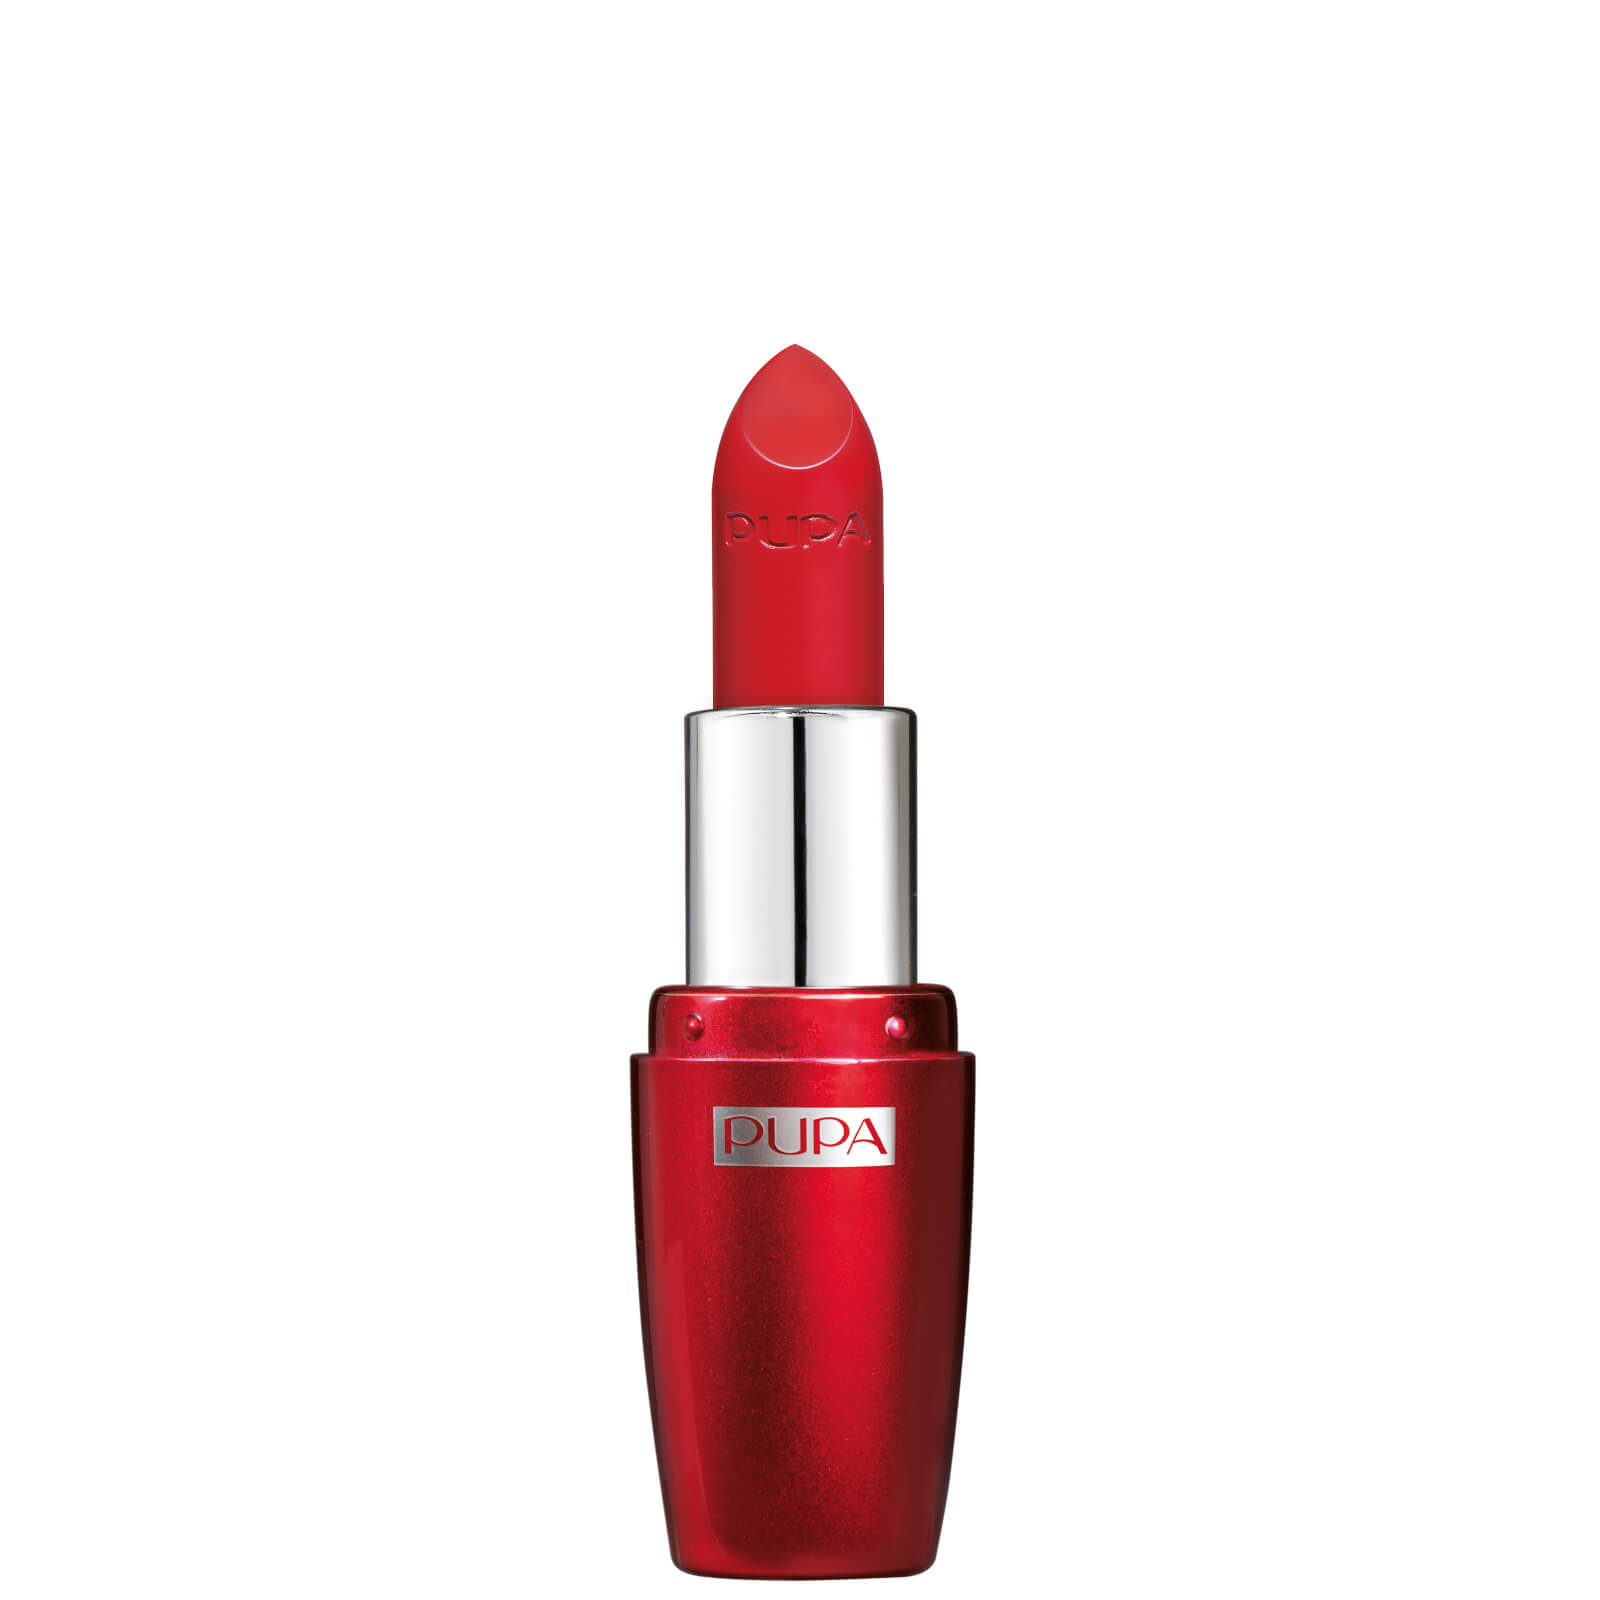 PUPA I'm Sexy Absolute Shine Lipstick 3.5g (Various Shades) - Berry Tentation